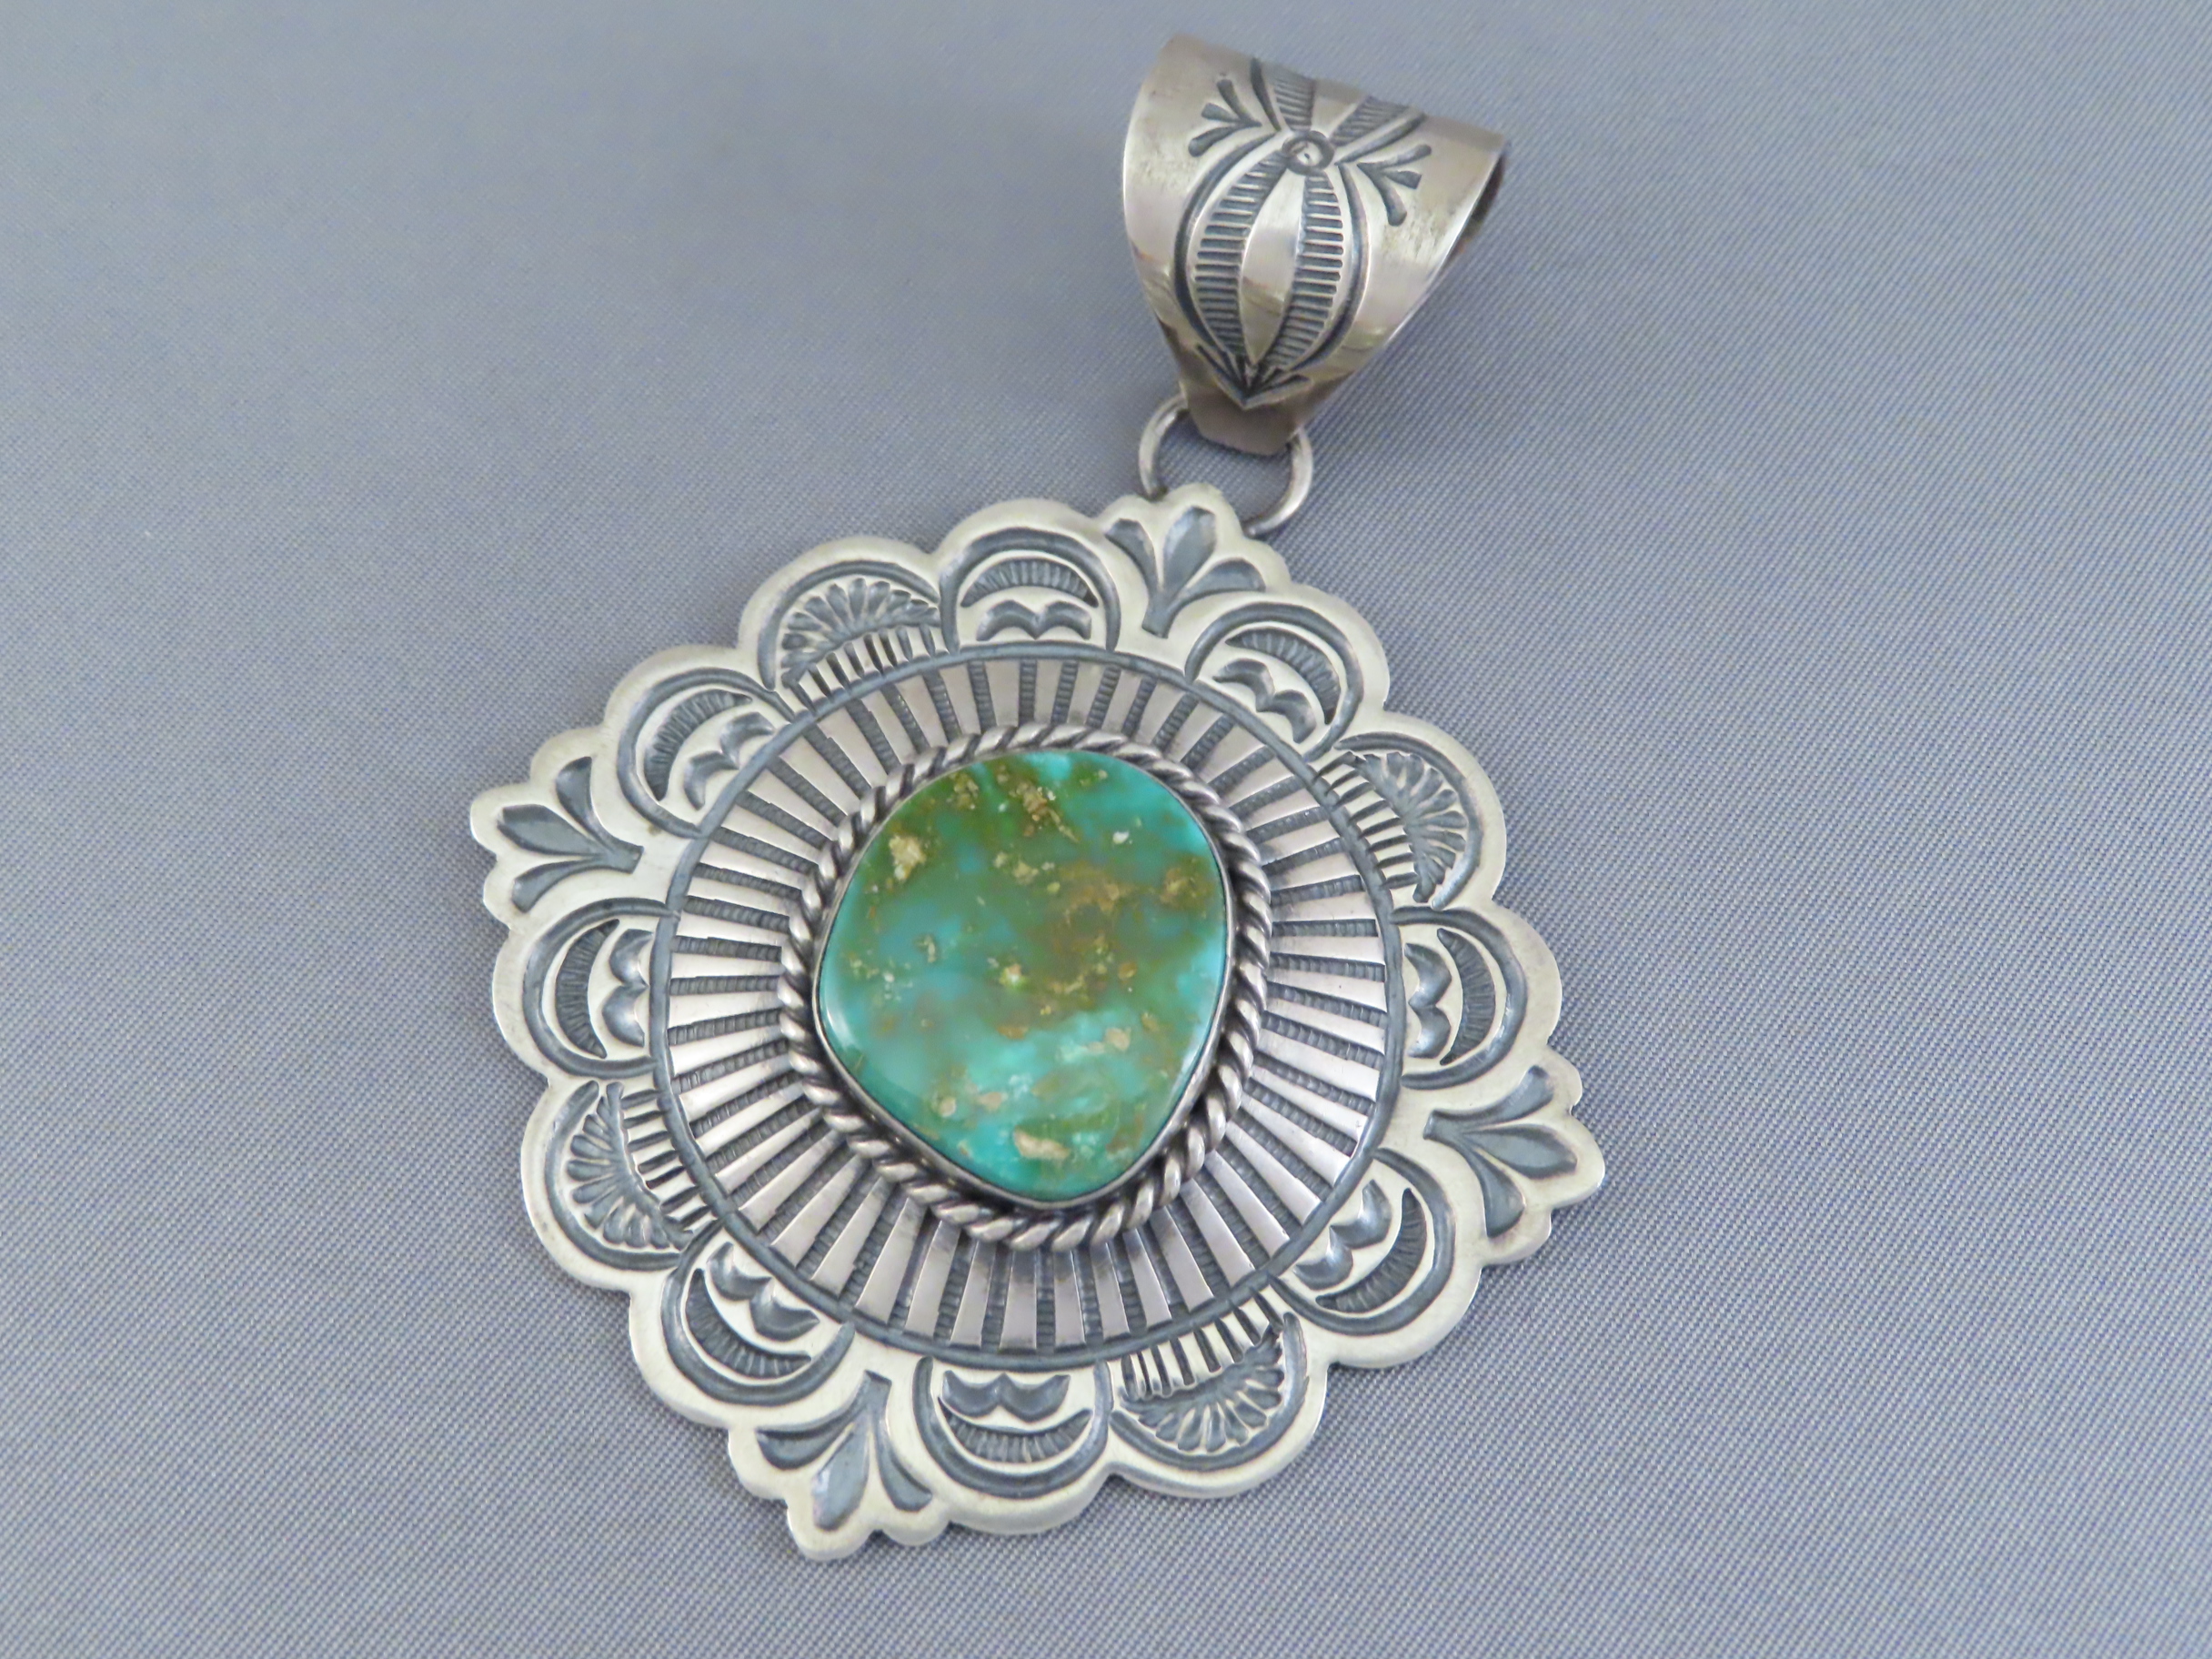 Royston Turquoise Pendant by Arnold Blackgoat